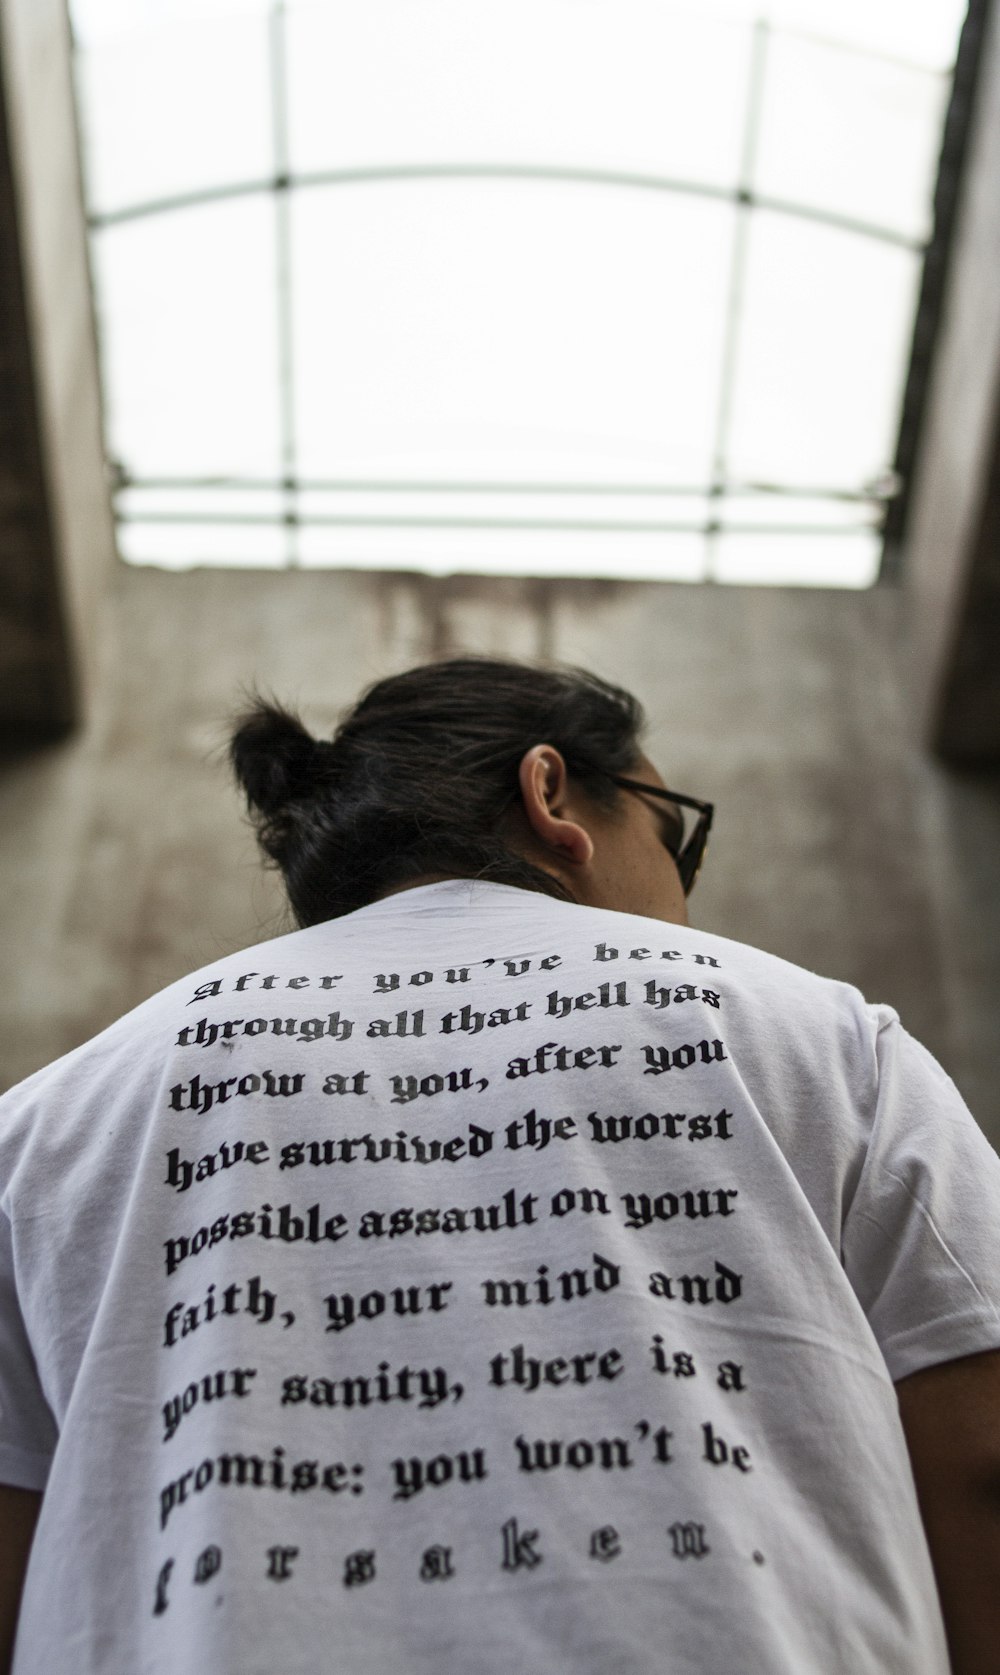 a person wearing a white shirt with a poem on it